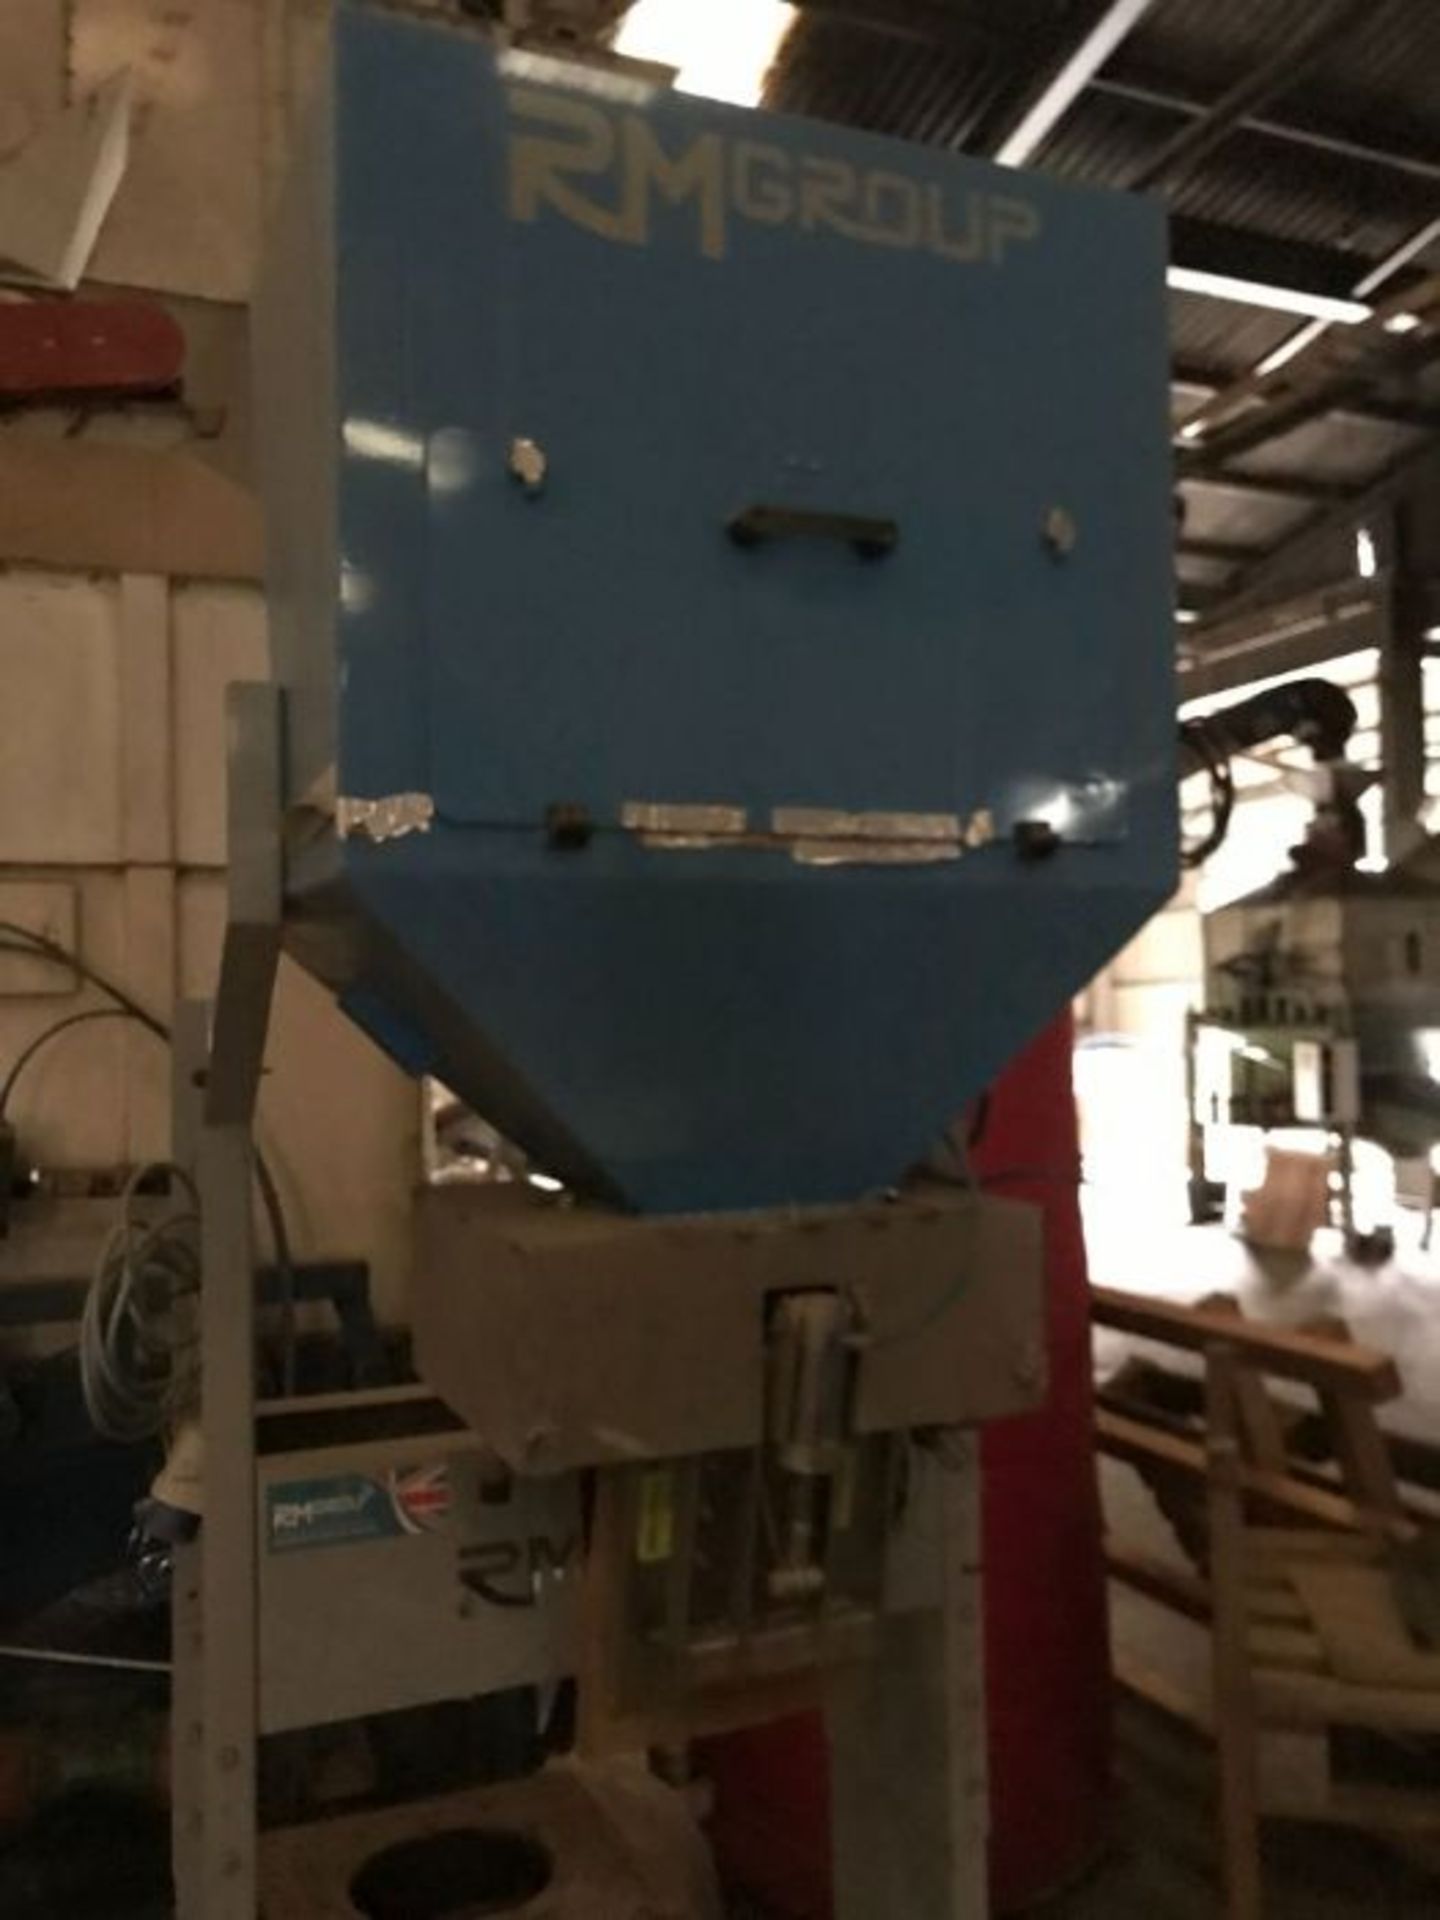 RM Group bag filling and sealing line (2018) - Image 10 of 24